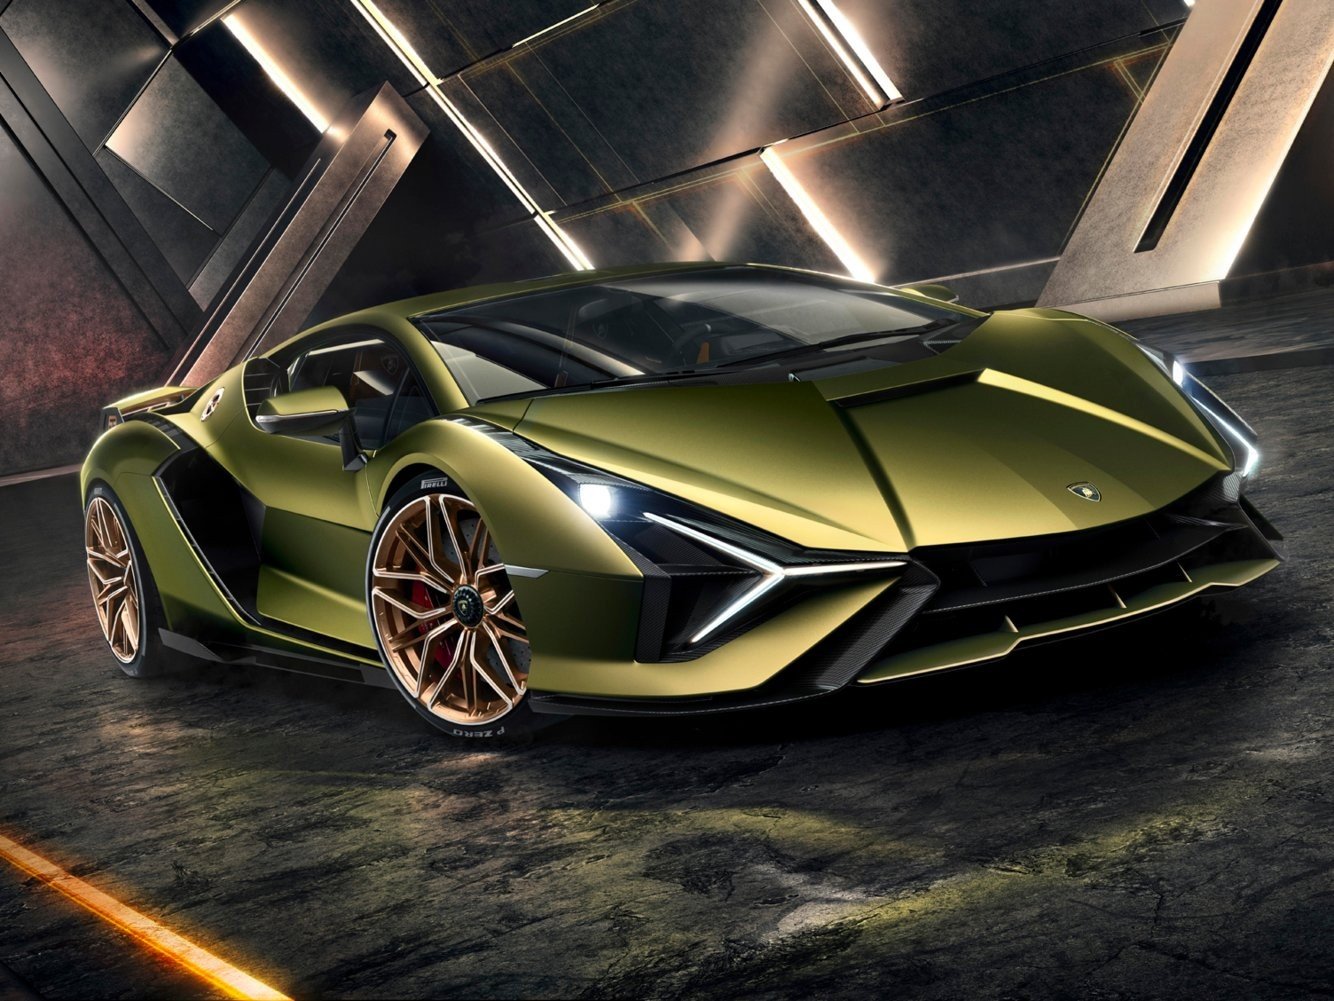 All 63 of Lamborghini's new $3.6 million Sian hybrid supercars have already  been sold – could Mark Zuckerberg be a buyer?